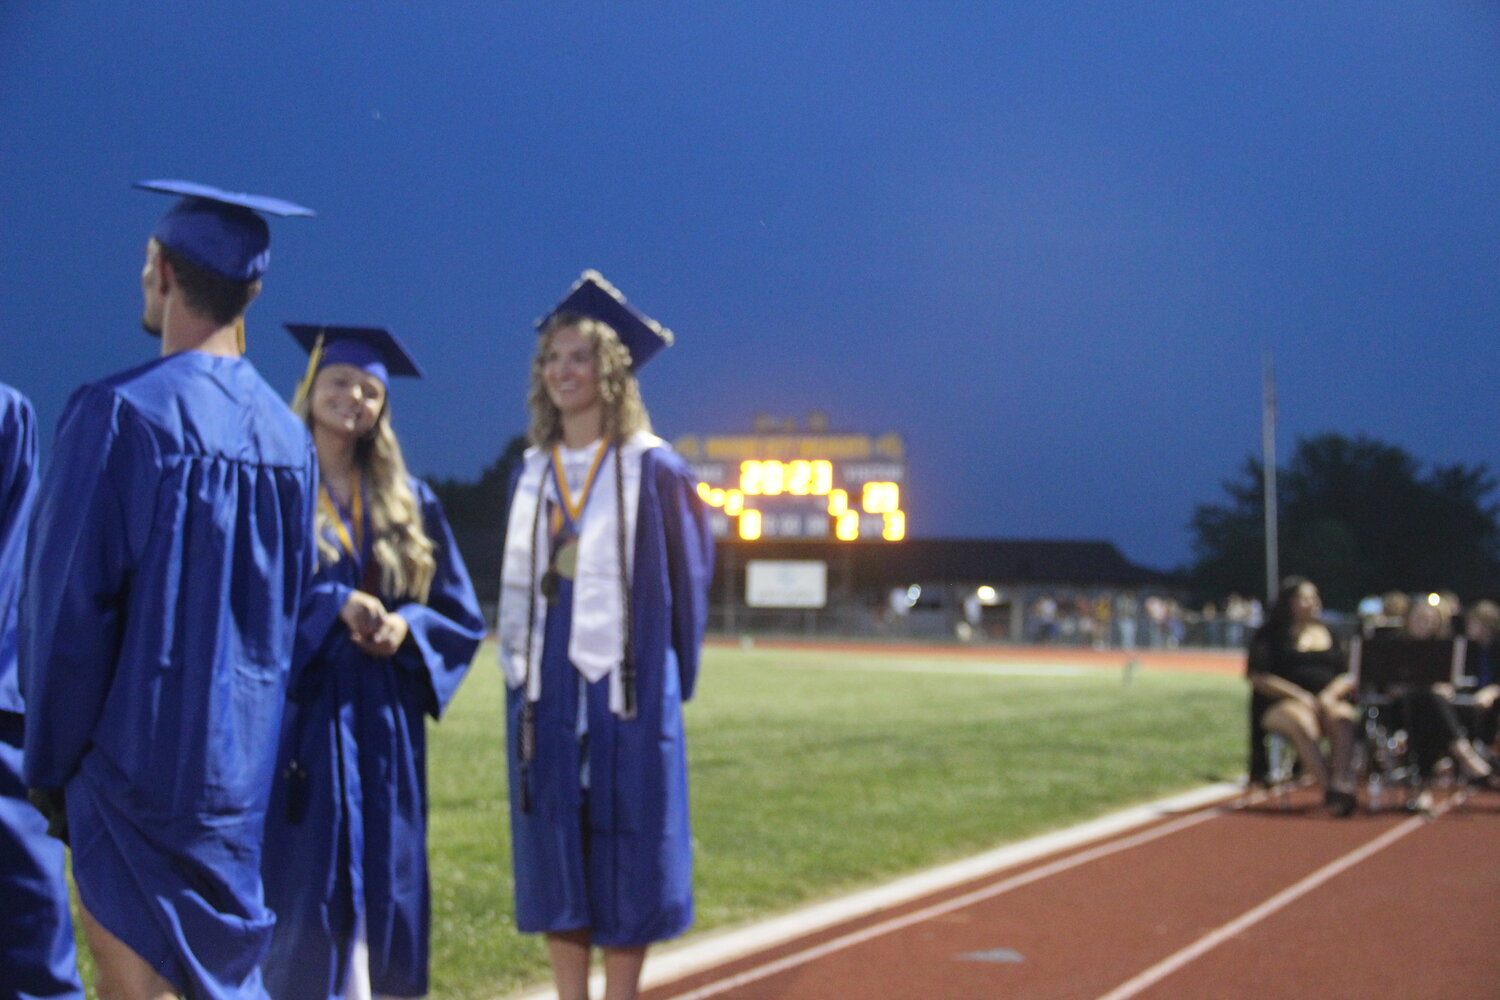 Katy Novak and Victoria Orf wait in line for their chance to cross the stage and have their name announced to the crowd during the Wright City High School graduation ceremony.